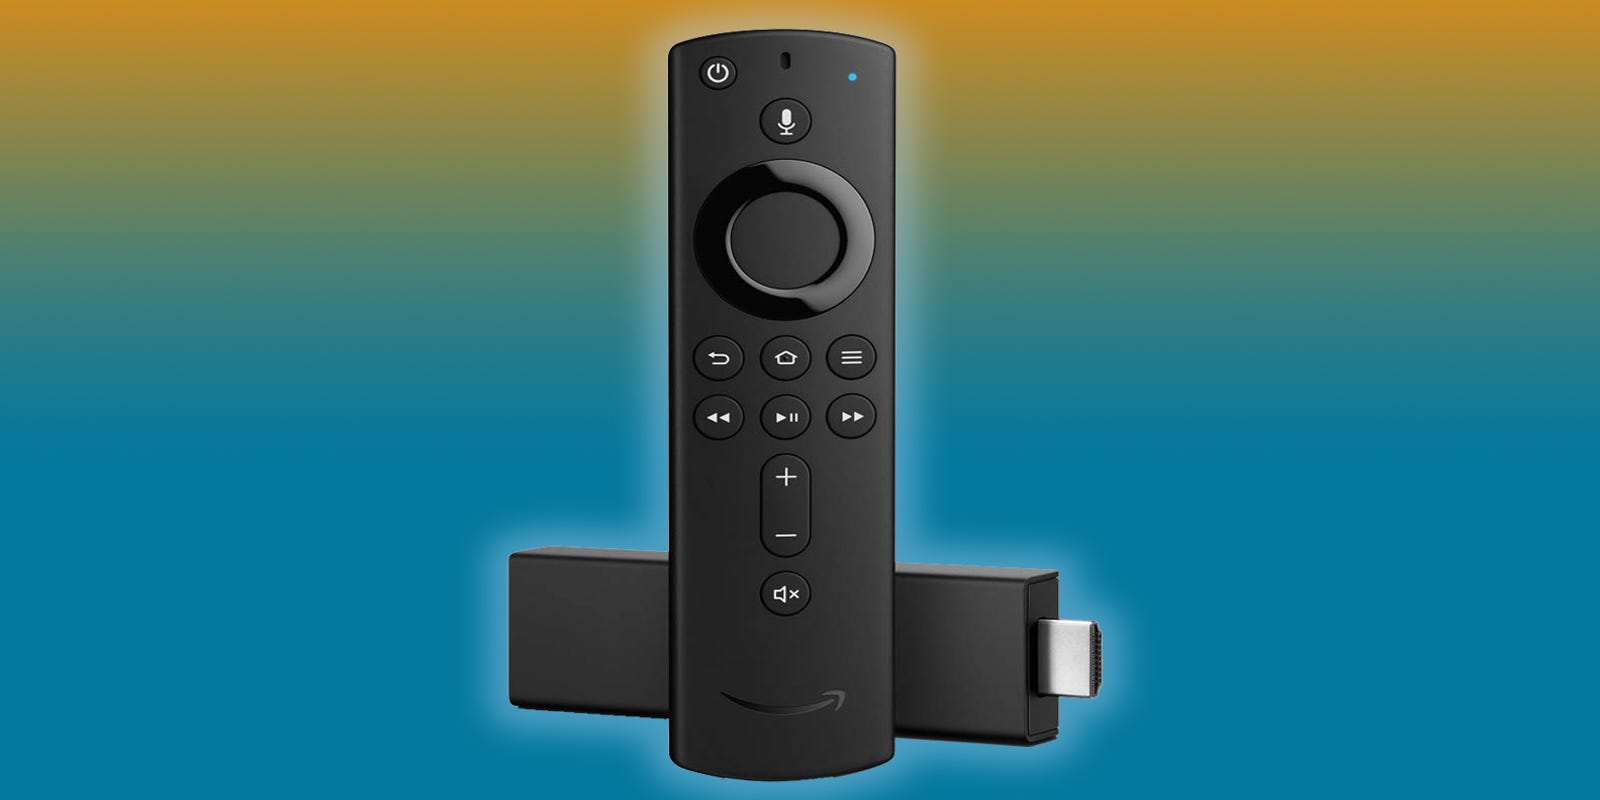 6c7179b8 9ceb 460e A10c 6eab7b60e7da Amazon Fire TV Stick 4K Prime Day ?crop=1583,890,x0,y0&width=1600&height=800&fit=bounds